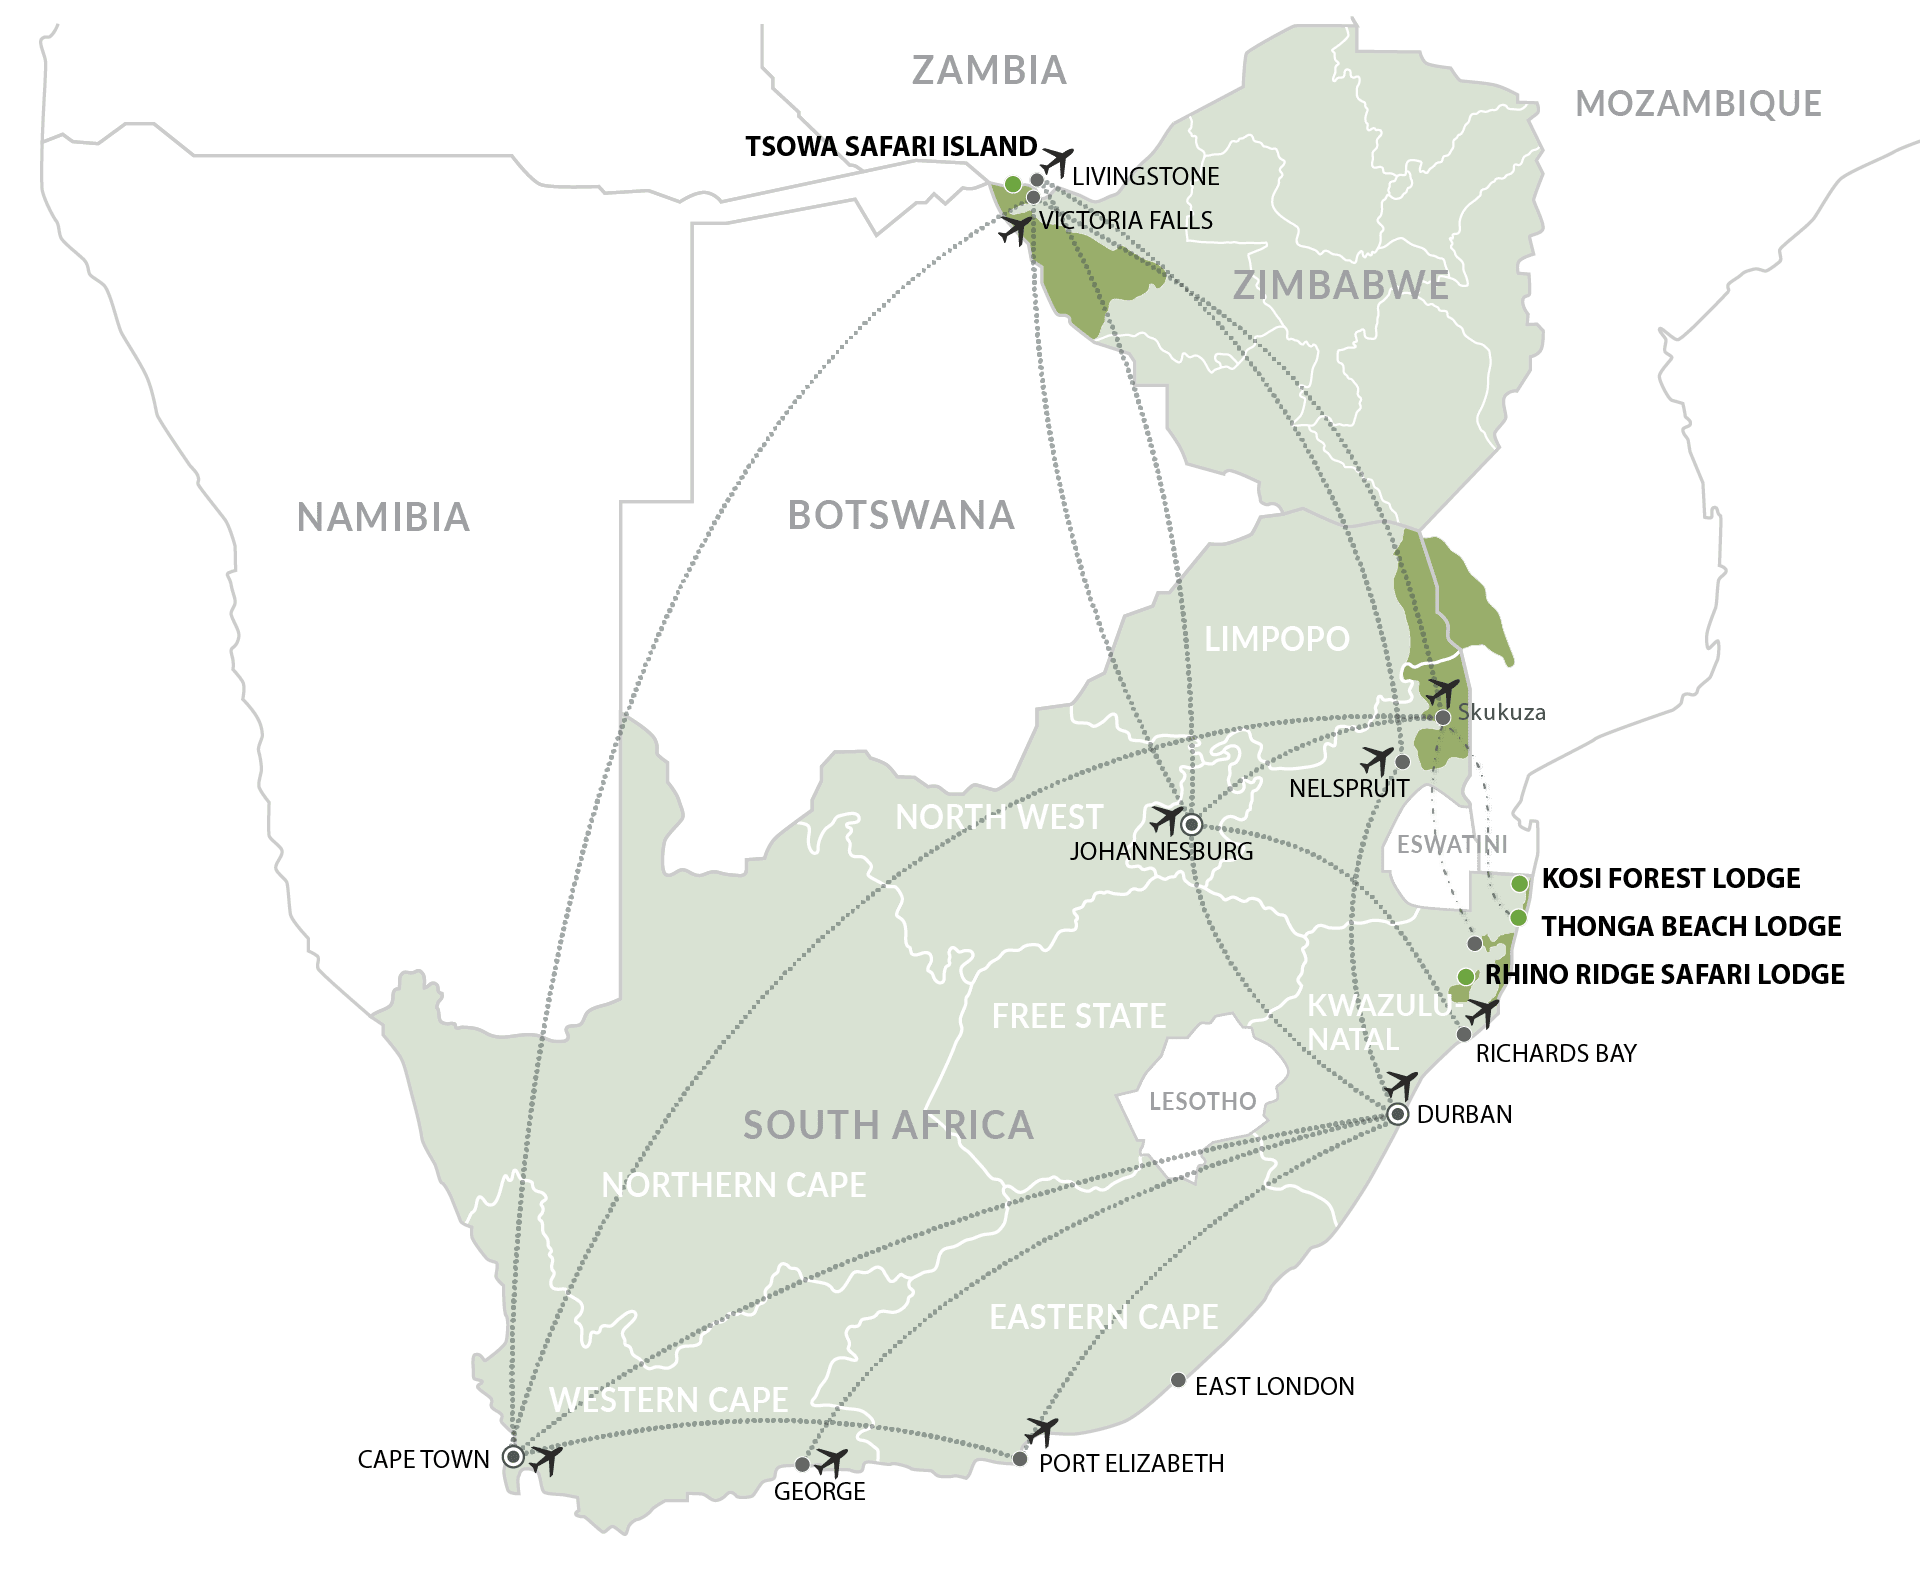 IAL-MAPS-Southern-Africa_Individual-Lodges